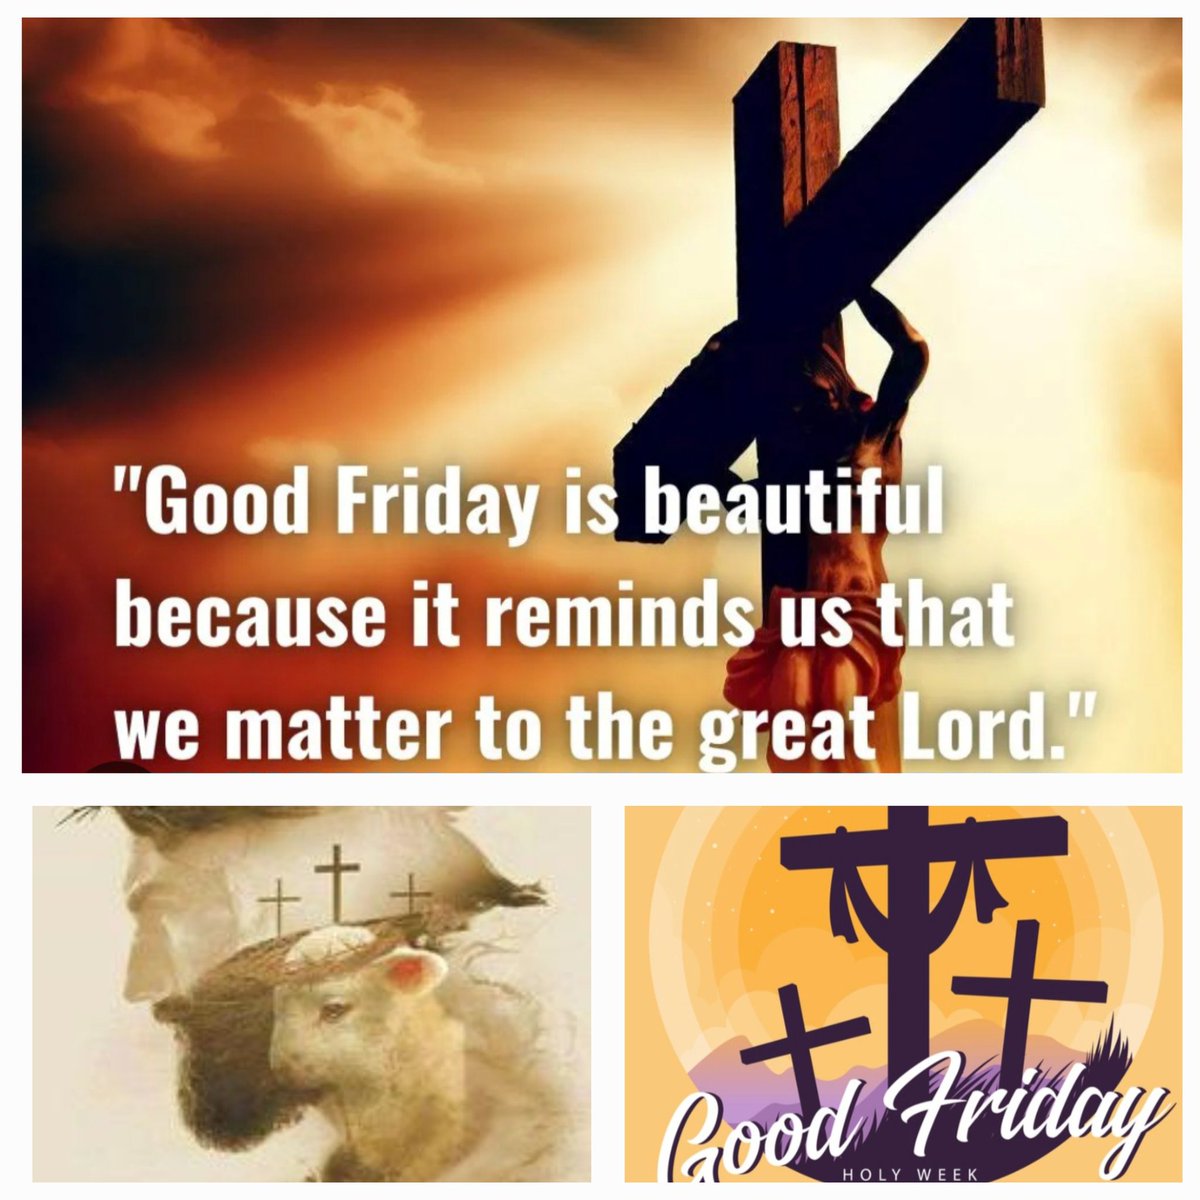 Blessings and best wishes to all today #GoodFriday 🤗